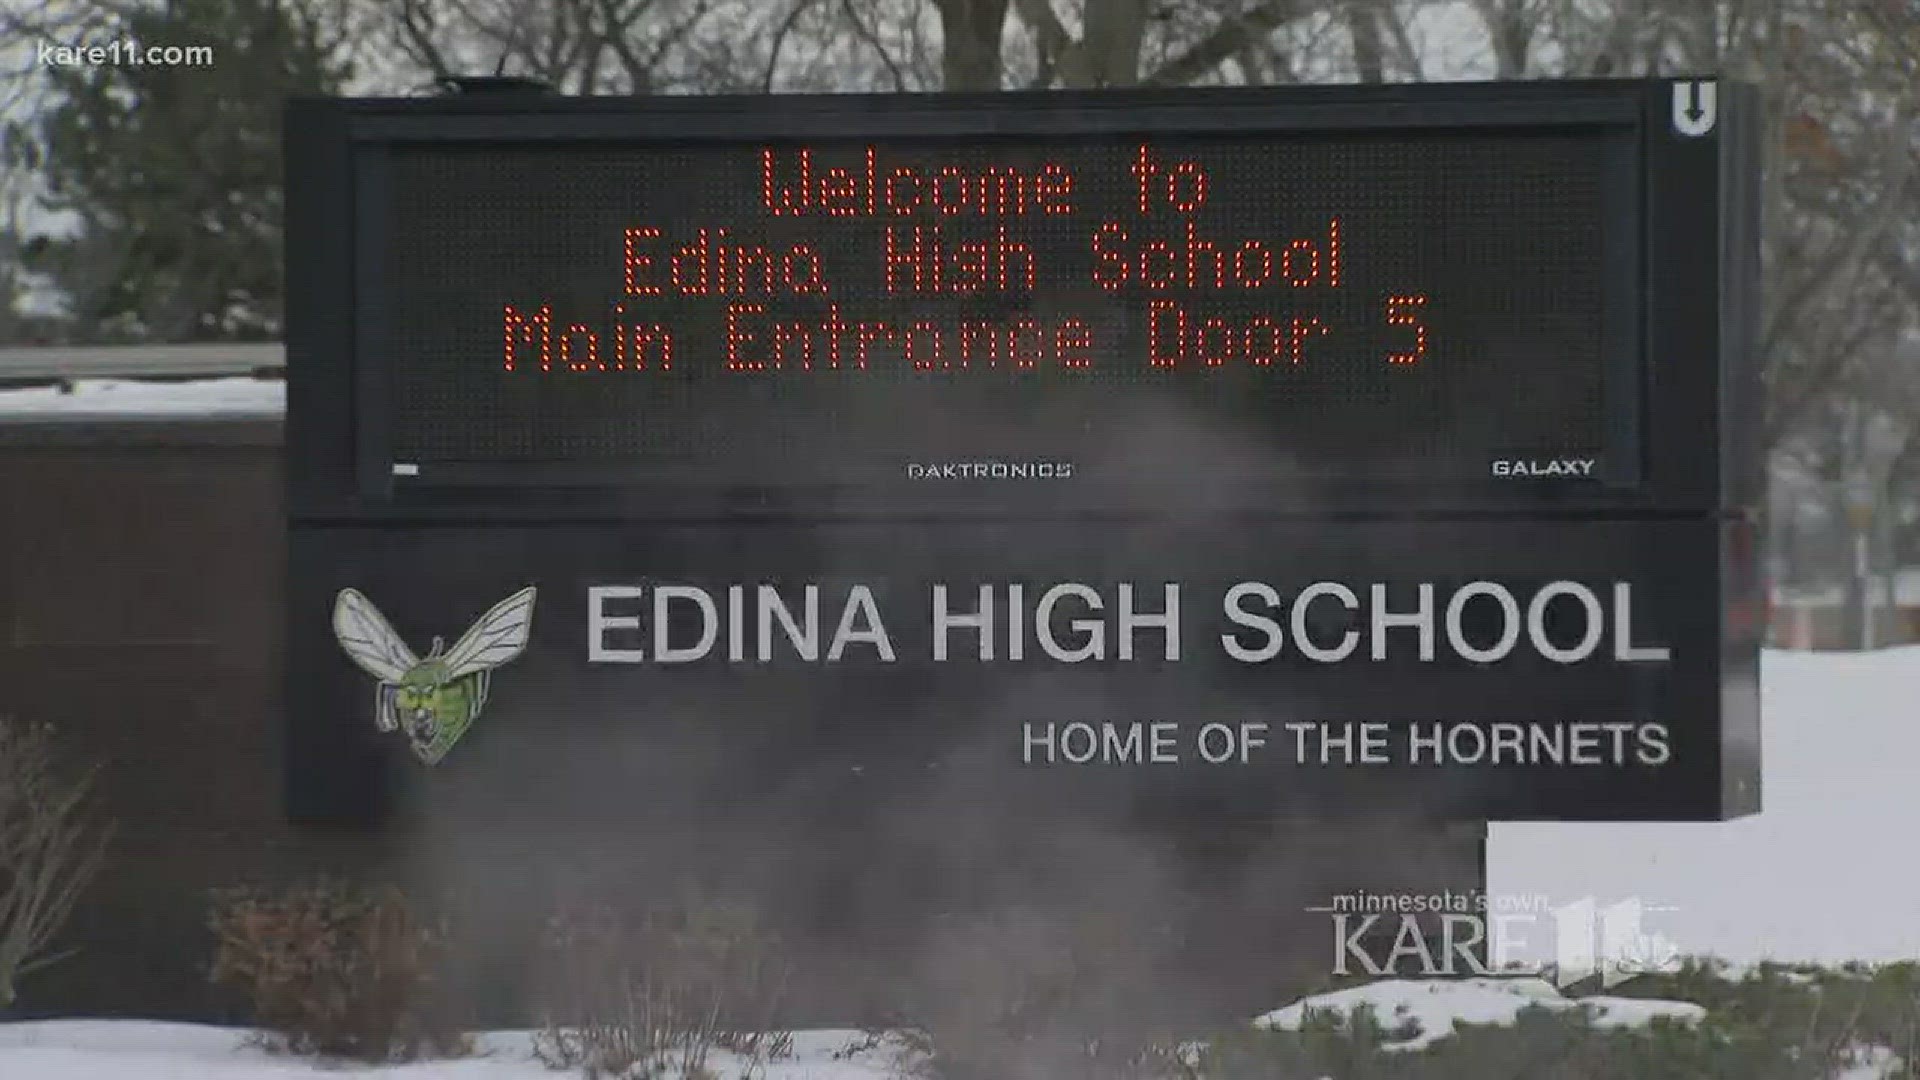 Days after members of the Edina High School Young Conservatives Club filed a lawsuit claiming the district violated their First Amendment rights by shutting down their club, its members and those who disagree with their claims say there is added tension a